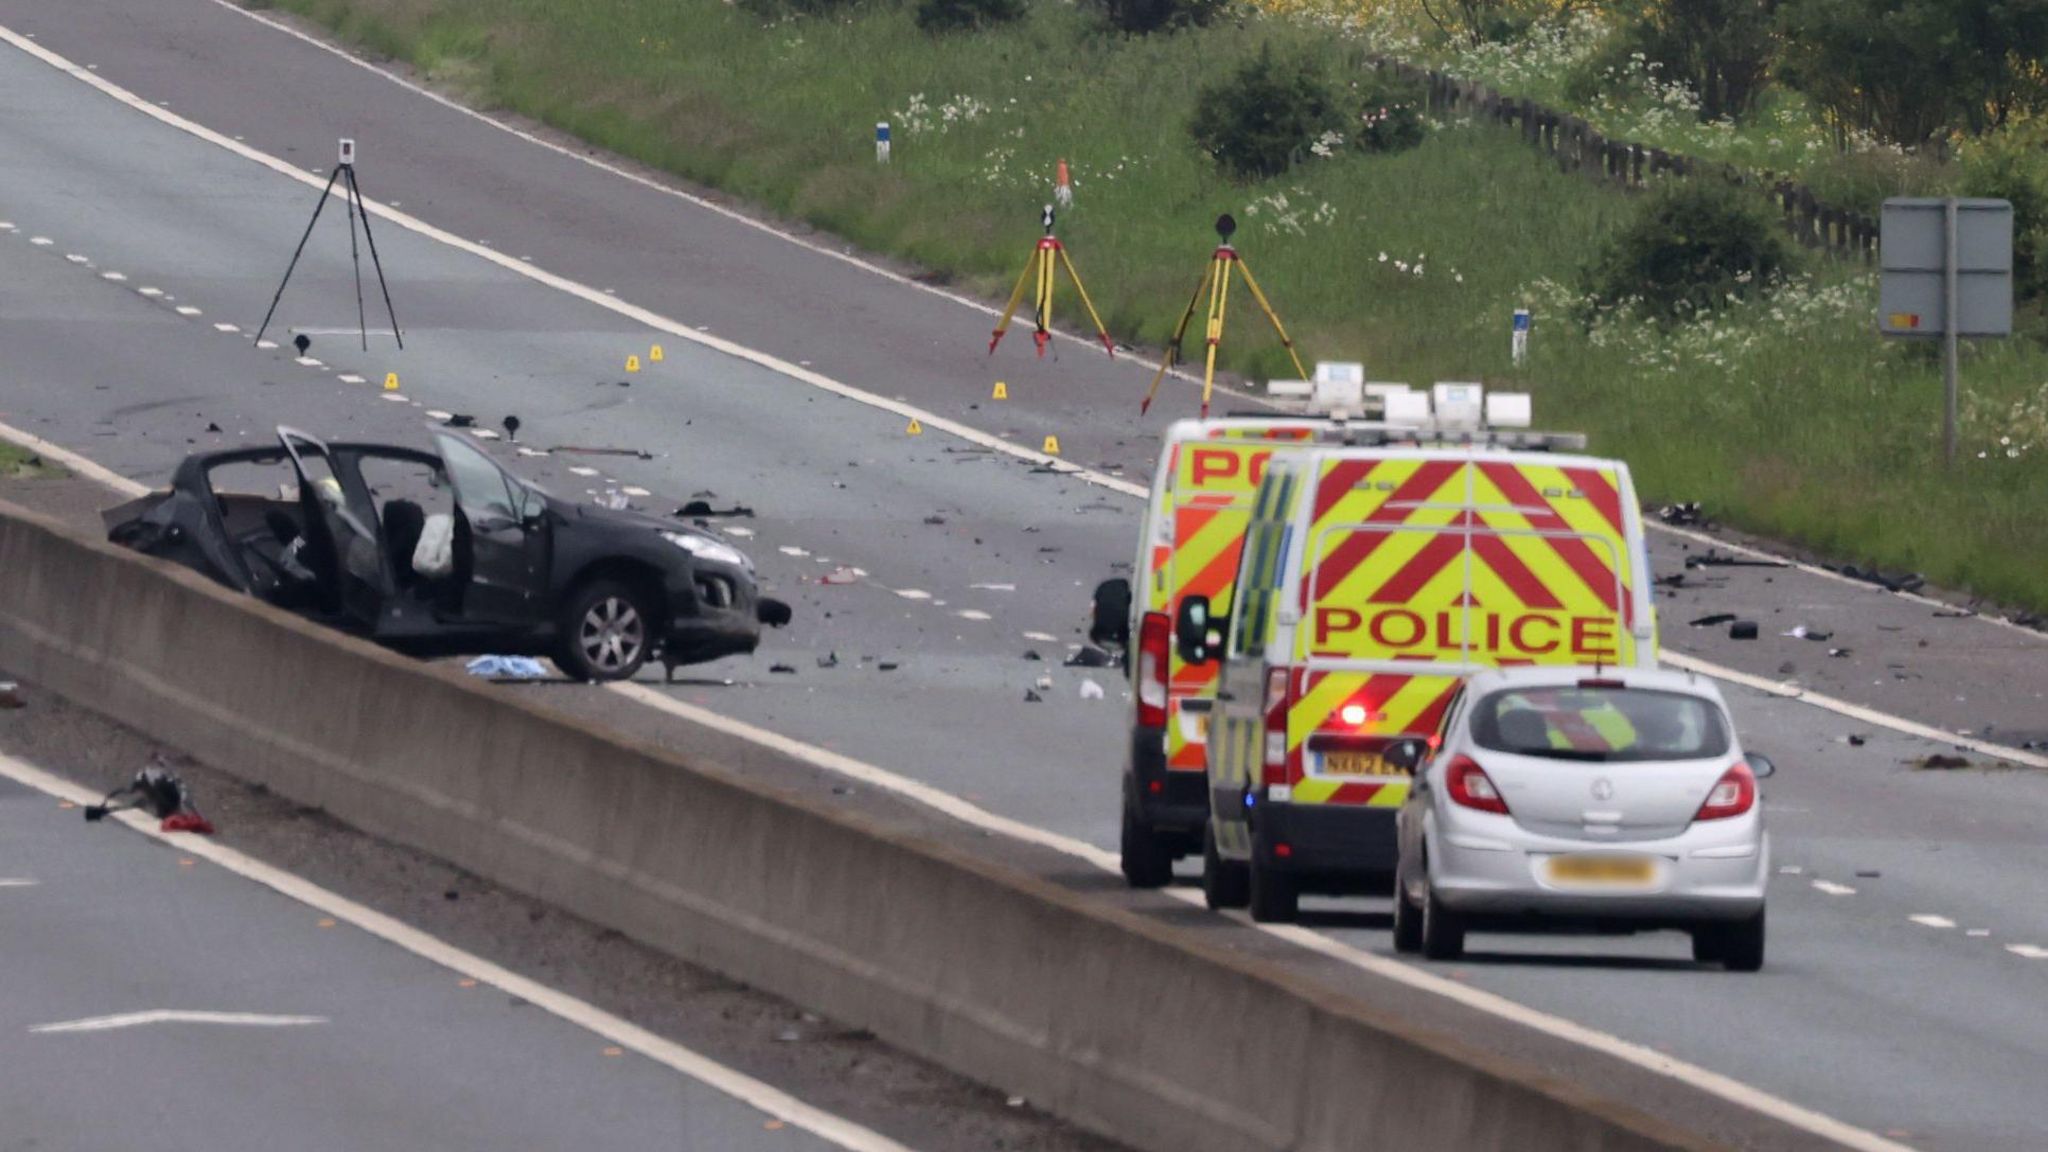 The wreckage of a car with signs of forensic investigation